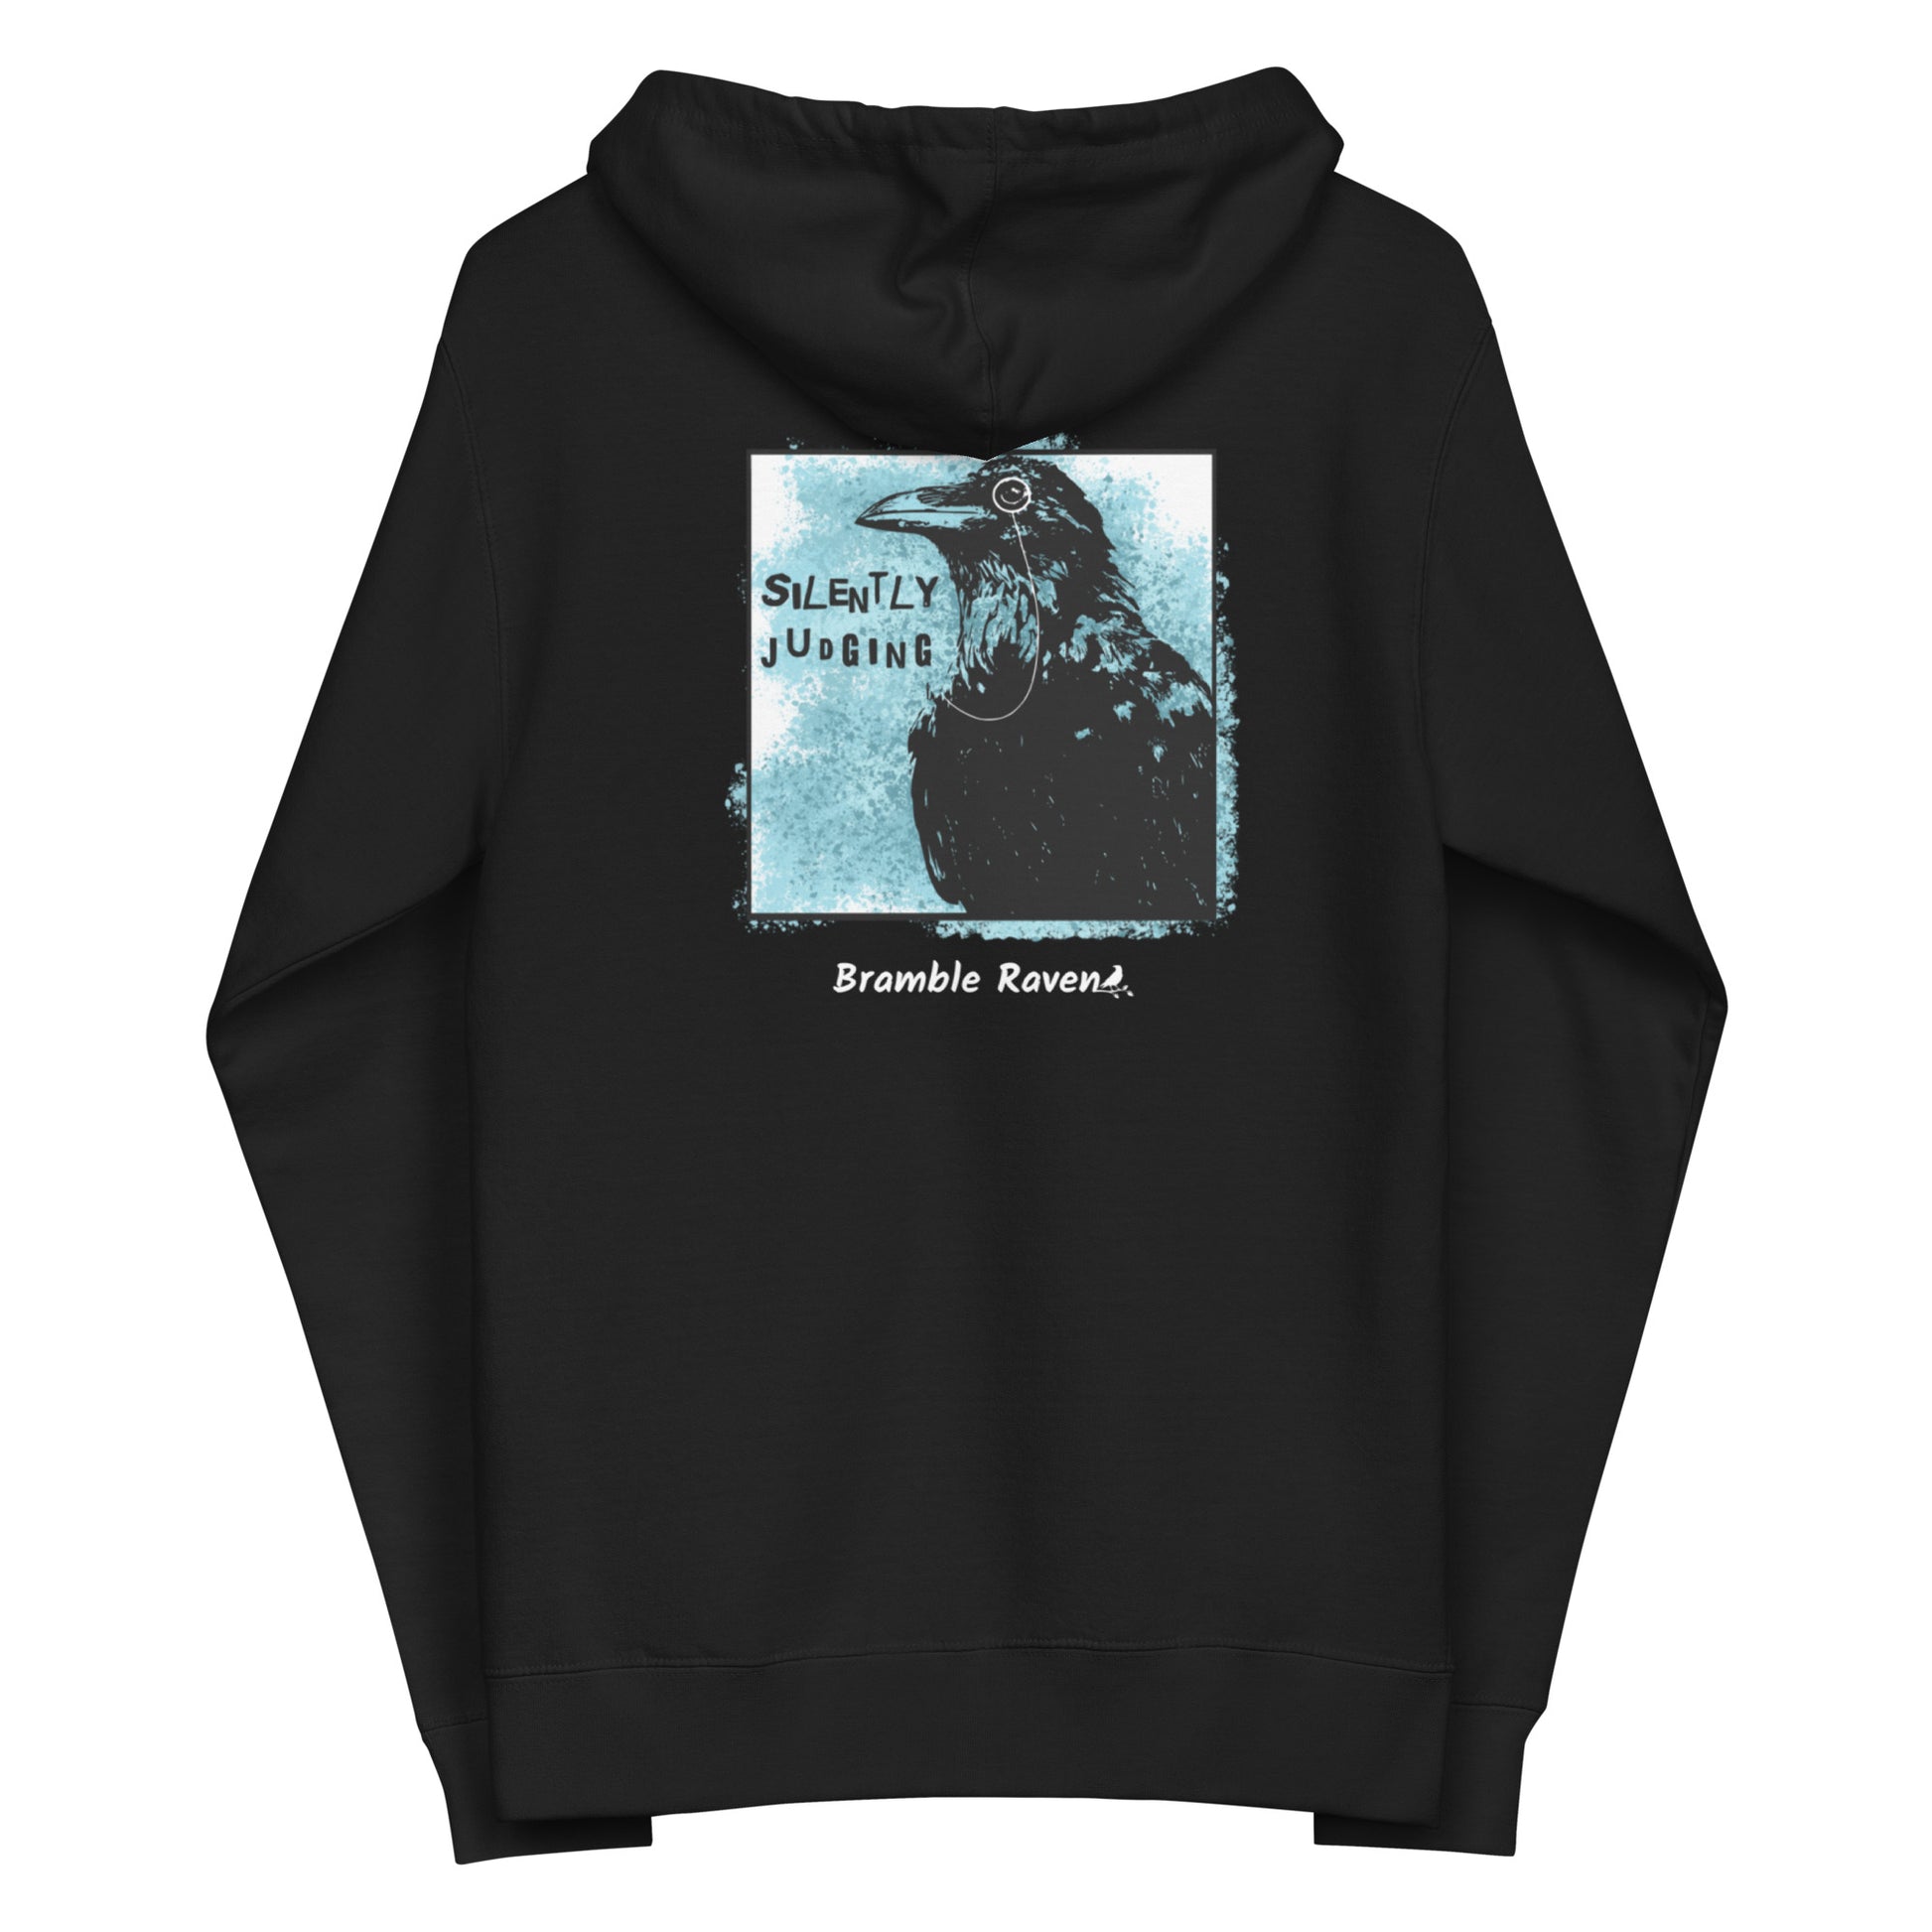 Unisex fleece-lined black colored zip-up hoodie with silently judging text by black crow wearing a monocle in a square with blue paint splatters.  Design on the back of hoodie.